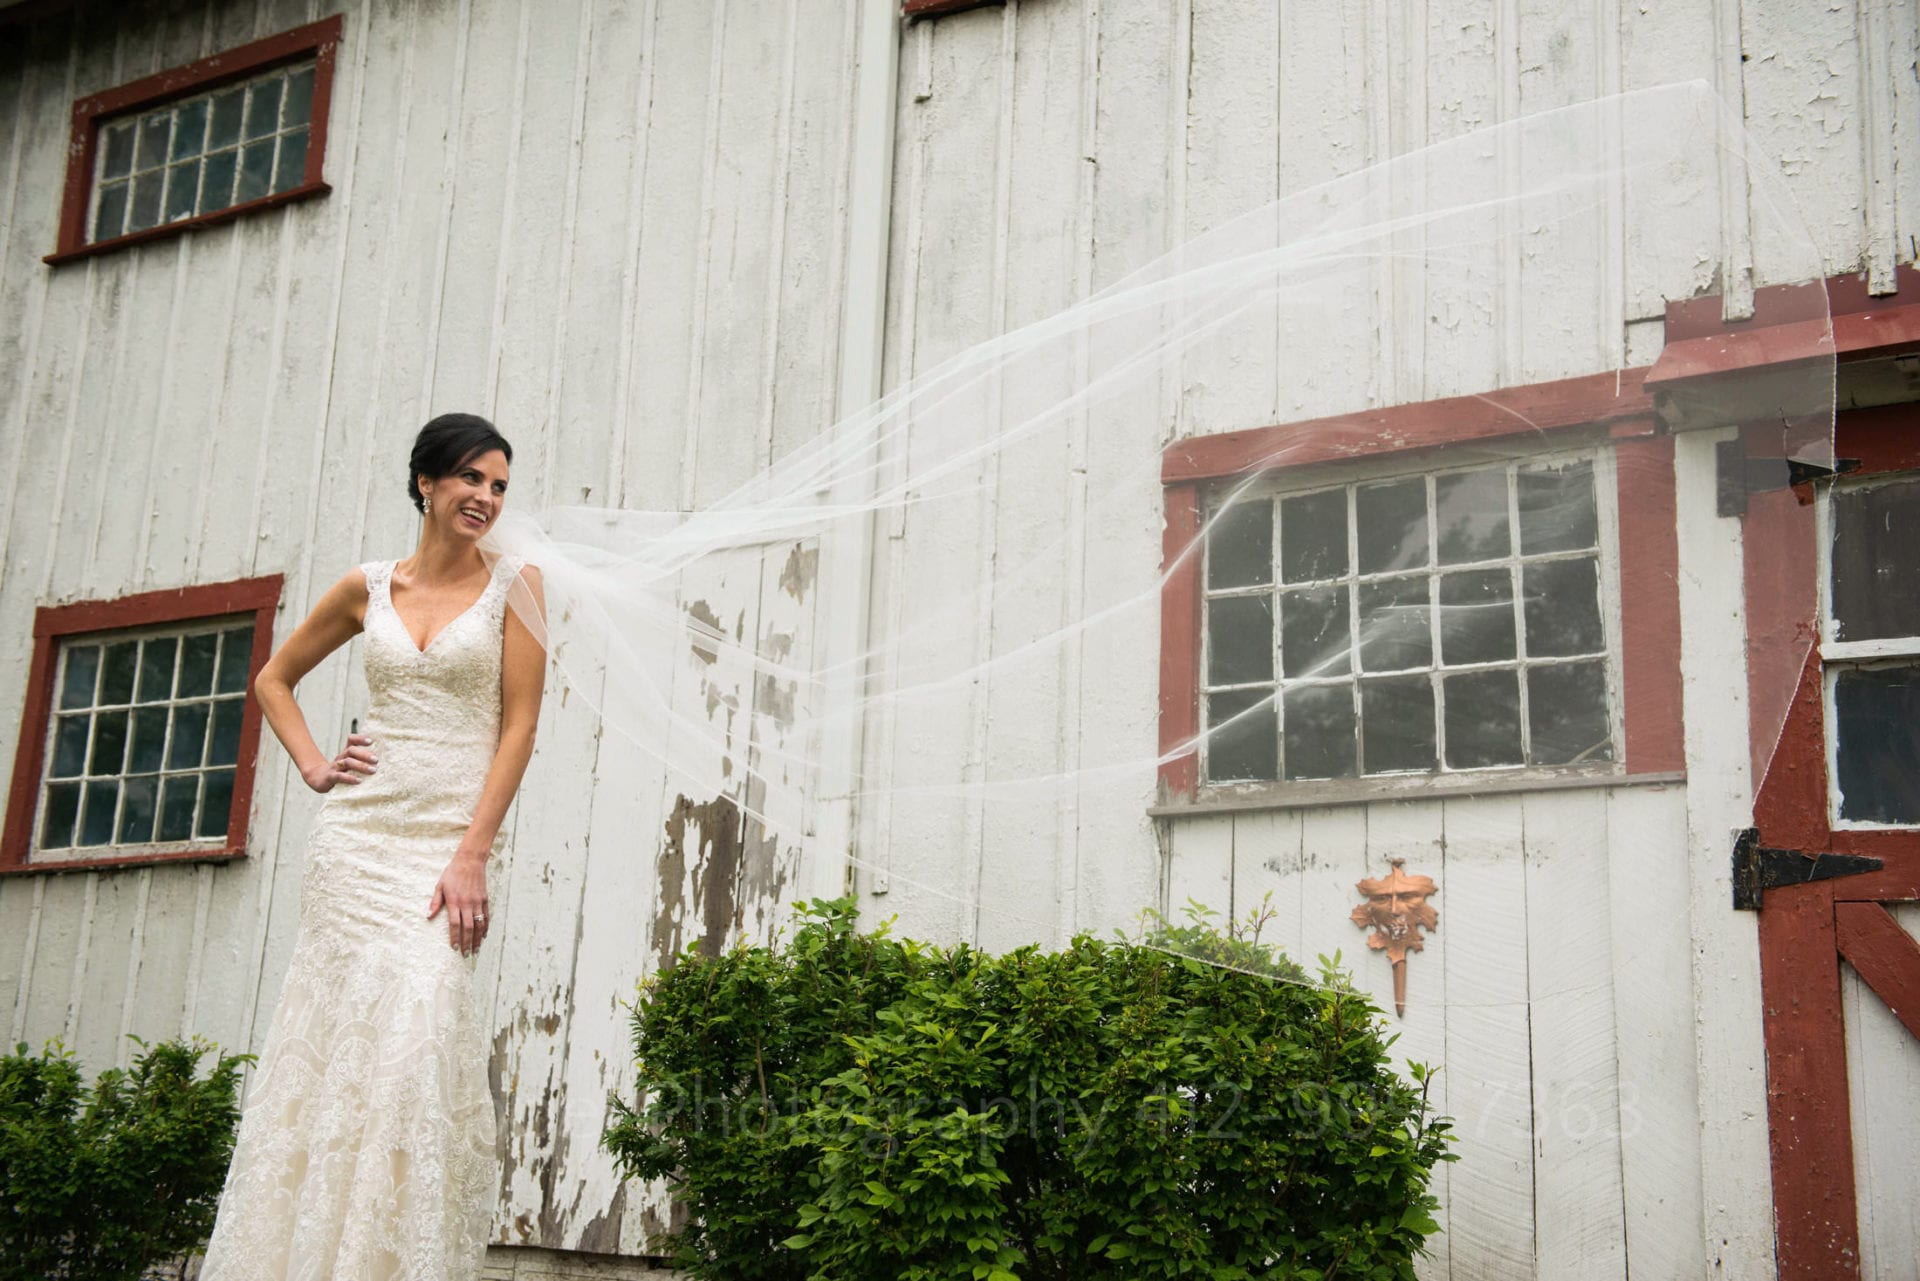 standing at the left side of the frame, a bride watches her long veil blow to the right in front of a white barn with red trim. Wedding Photography In West Virginia.